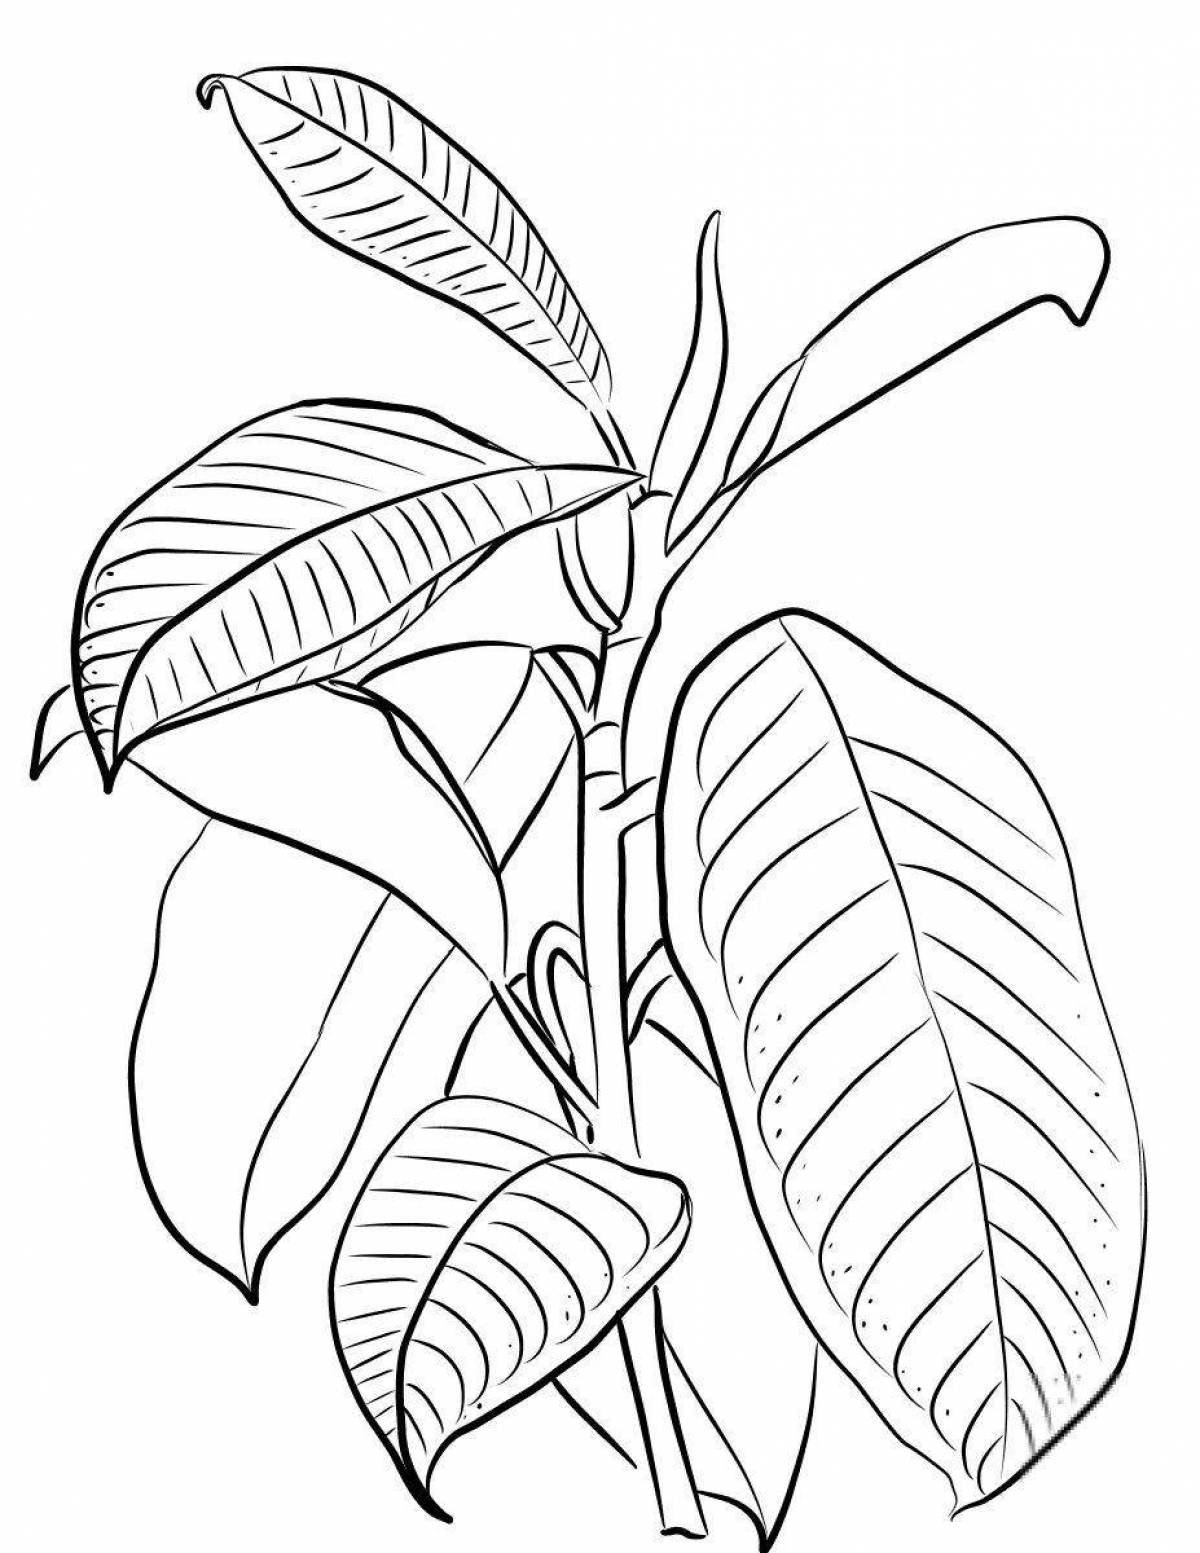 Glorious ficus coloring for children